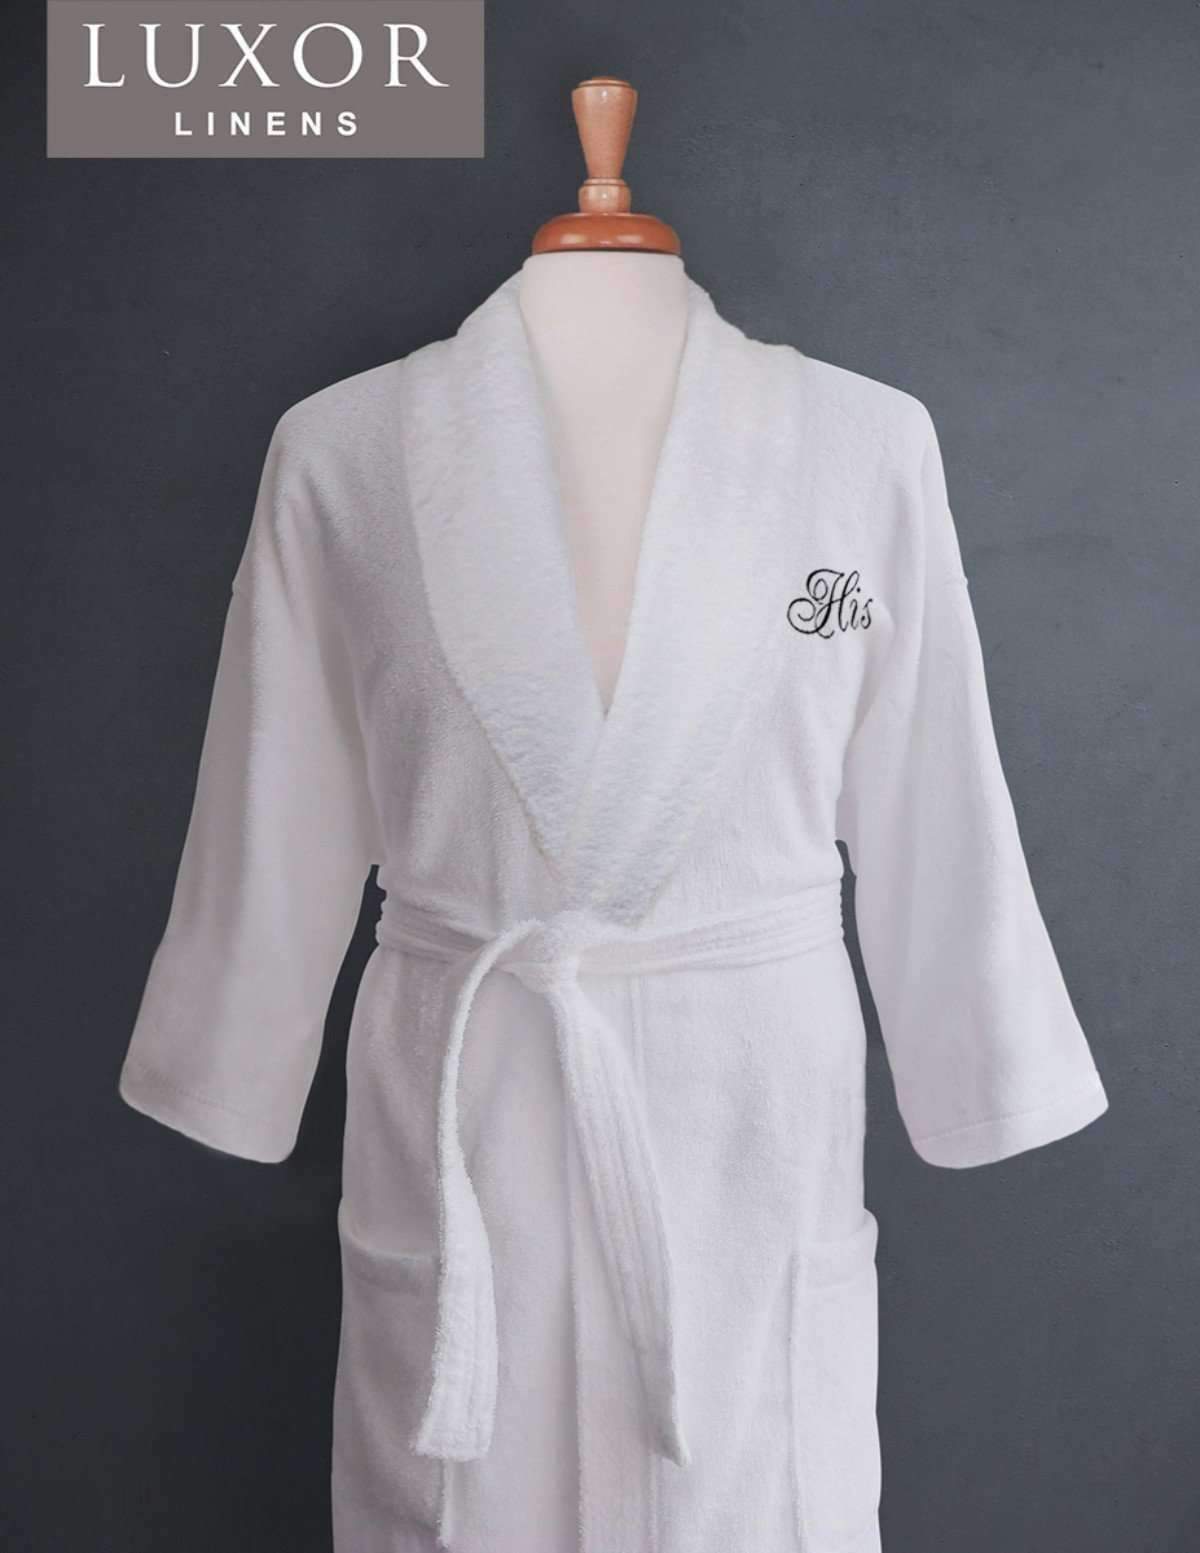 Lakeview Signature Egyptian Cotton Terry Spa Robes - Fun Gifts - Luxor Linens 